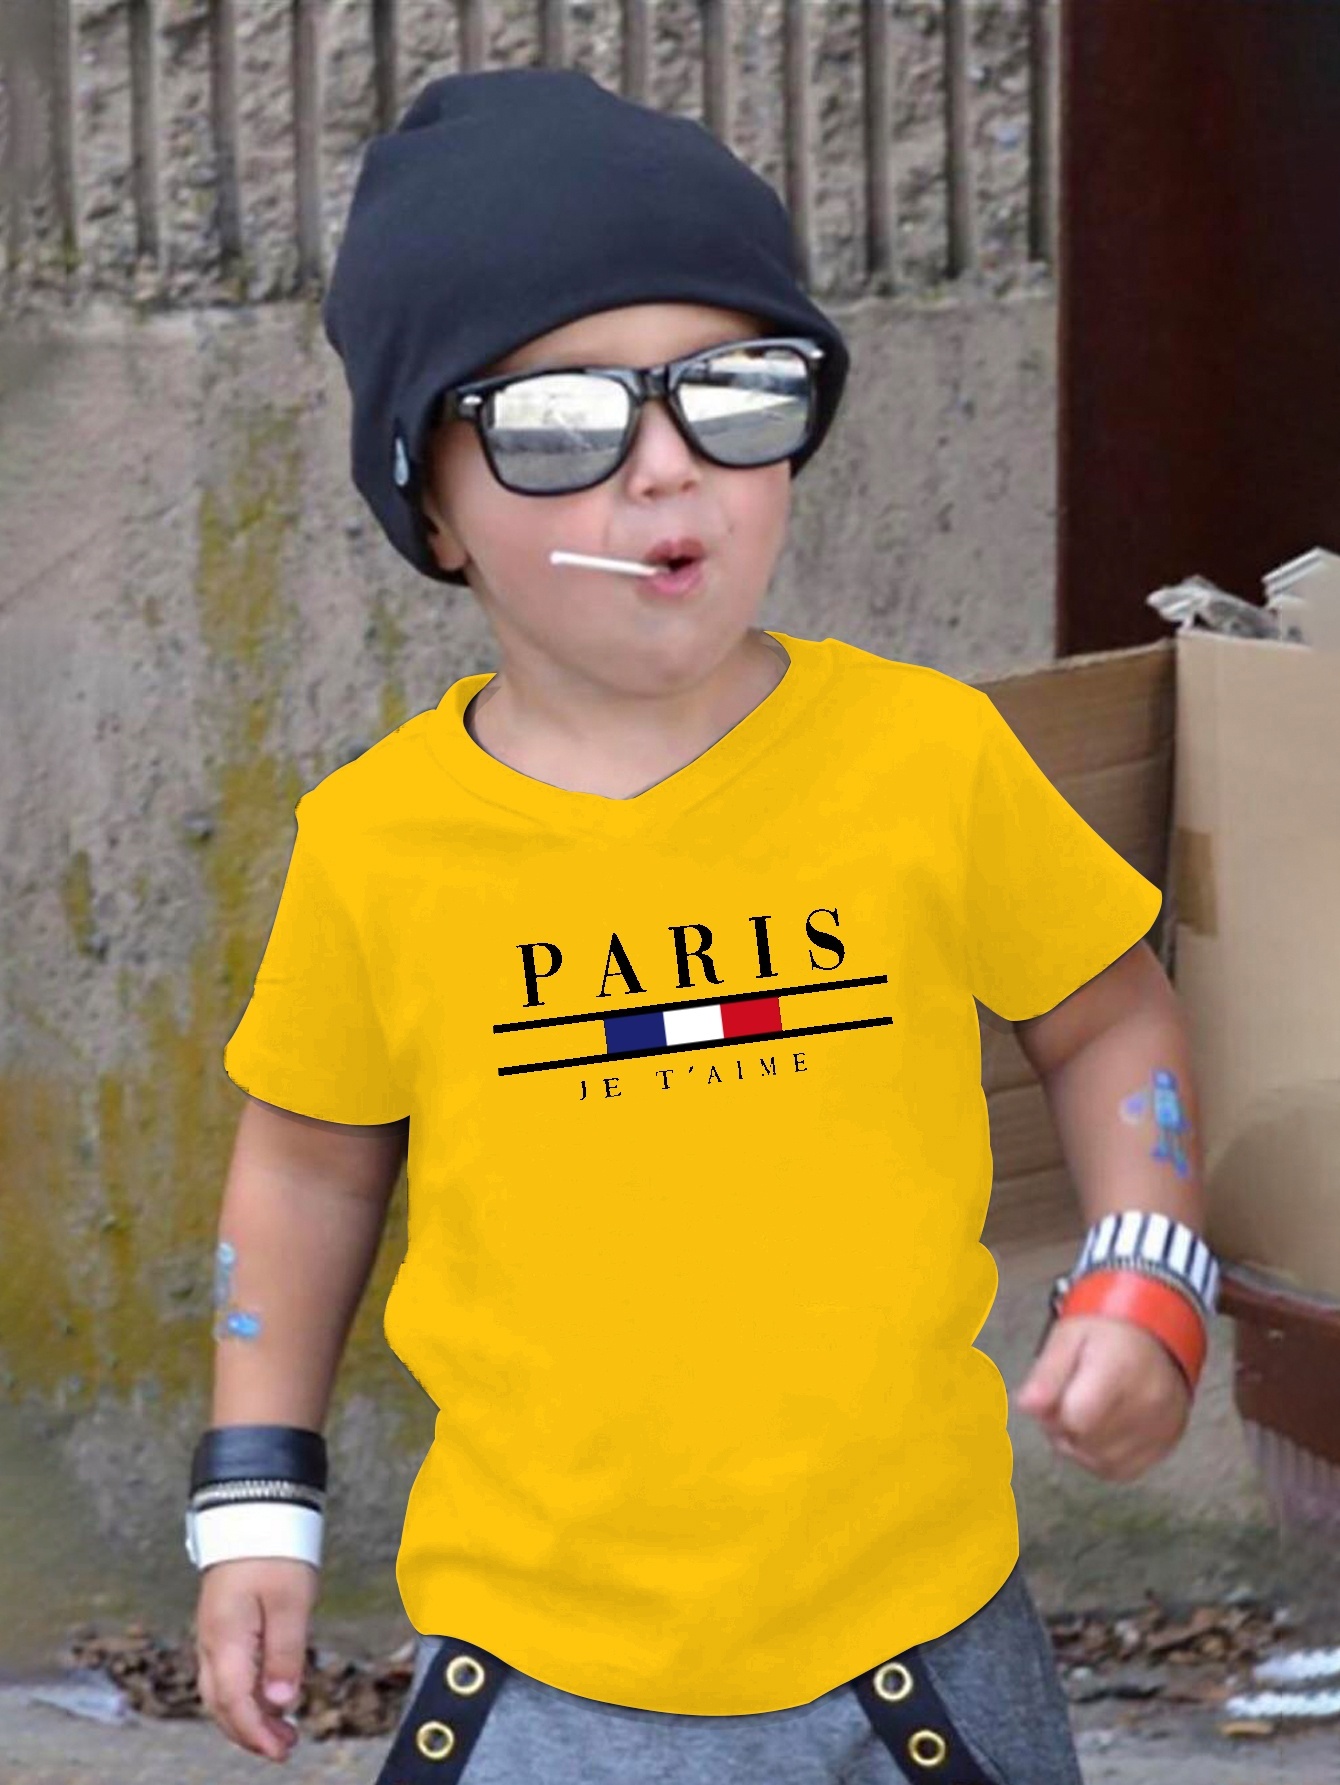 Paris Letter And Fishing Calling Print Boys Creative T-Shirt, Casual Lightweight Comfy Short Sleeve Tee Tops, Kids Clothings For Summer